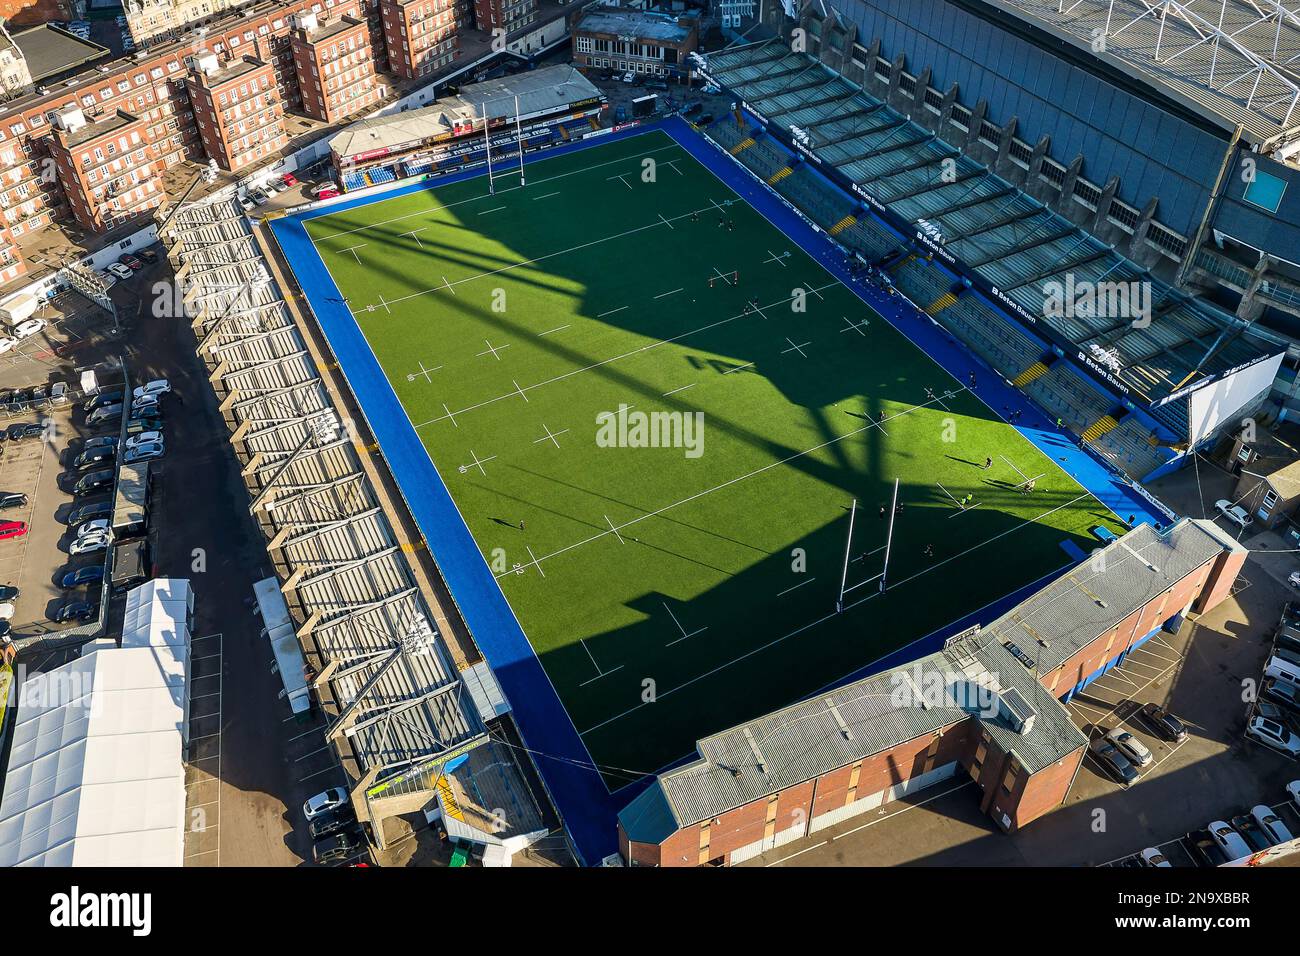 Aerial view of the centre of Cardiff and the Cardiff Arms Park rugby ground with a 4G plastic pitch. Stock Photo